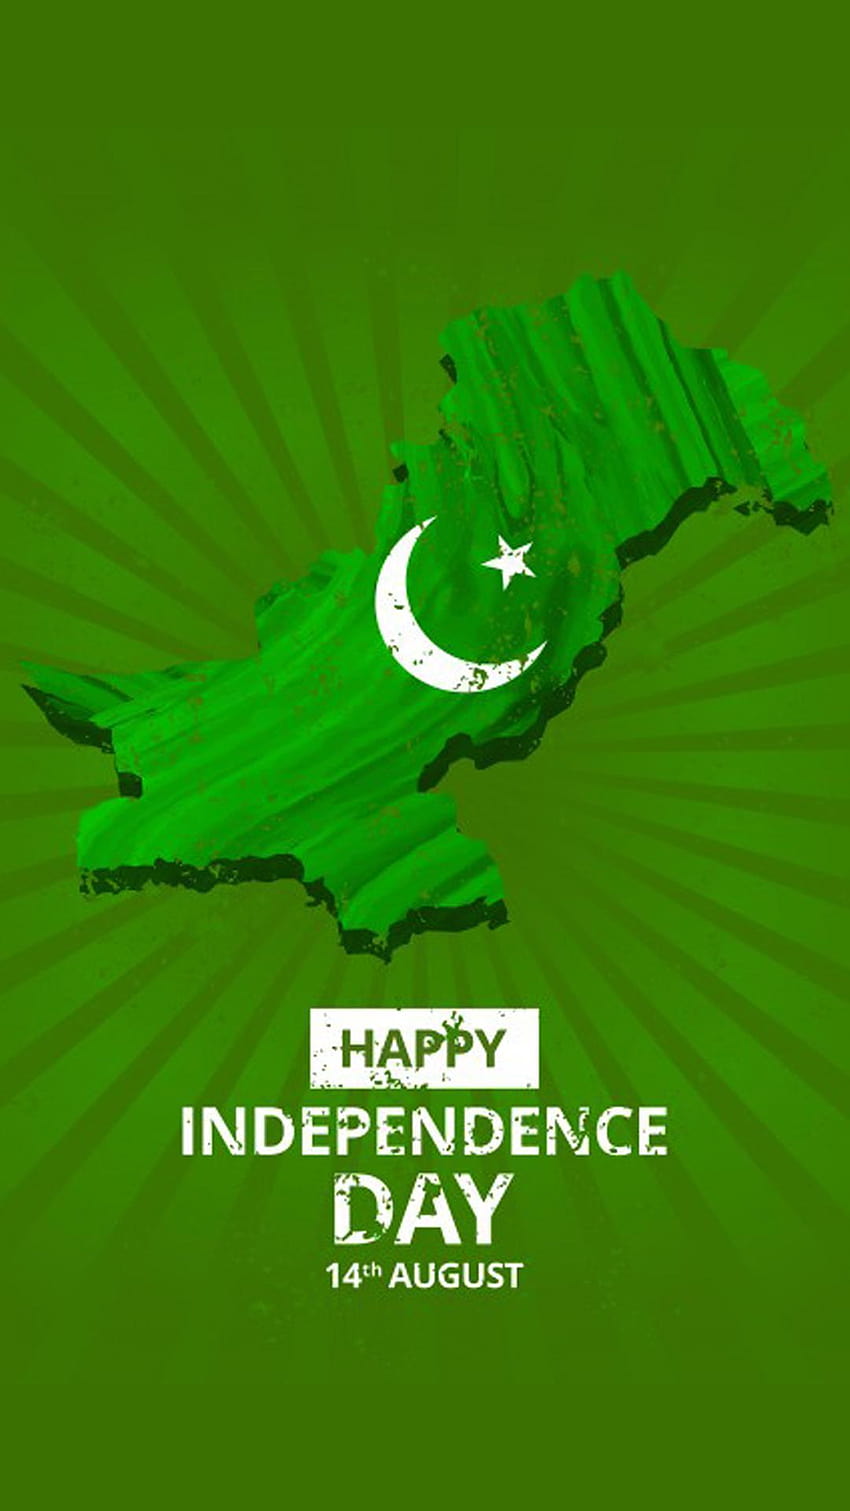 14 august pakistan independence day 2018 for Android, independence day of pakistan mobile HD phone wallpaper